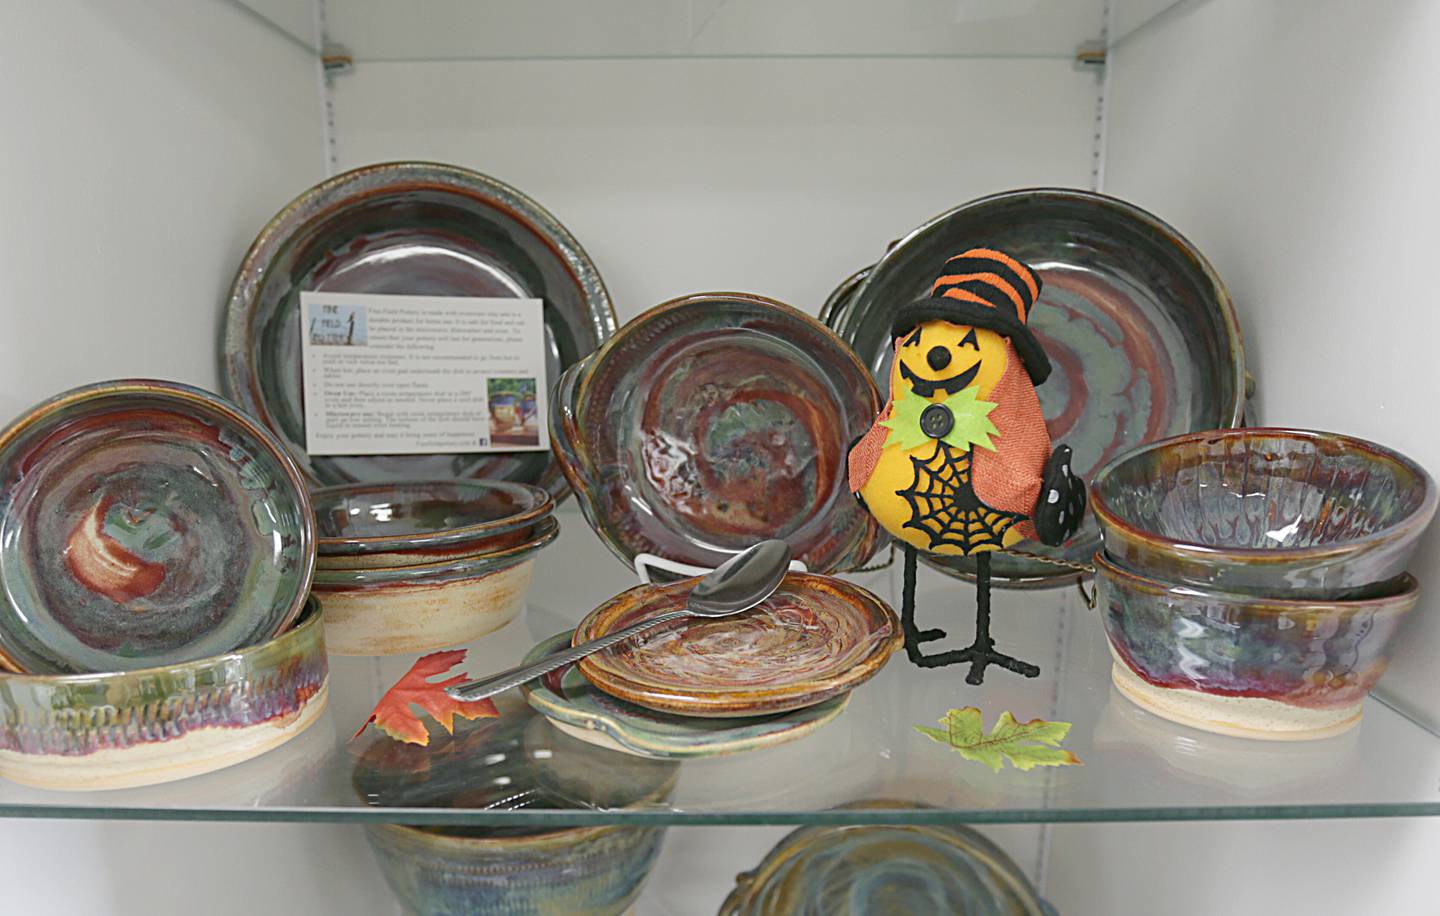 This pottery from the Fine Field Pottery in Streator is available to purchase as a gift at the Heritage Corridor Starved Rock Country Welcome Center, an Illinois Made Gift Shoppe on Thursday, Oct. 6, 2022 in Utica.